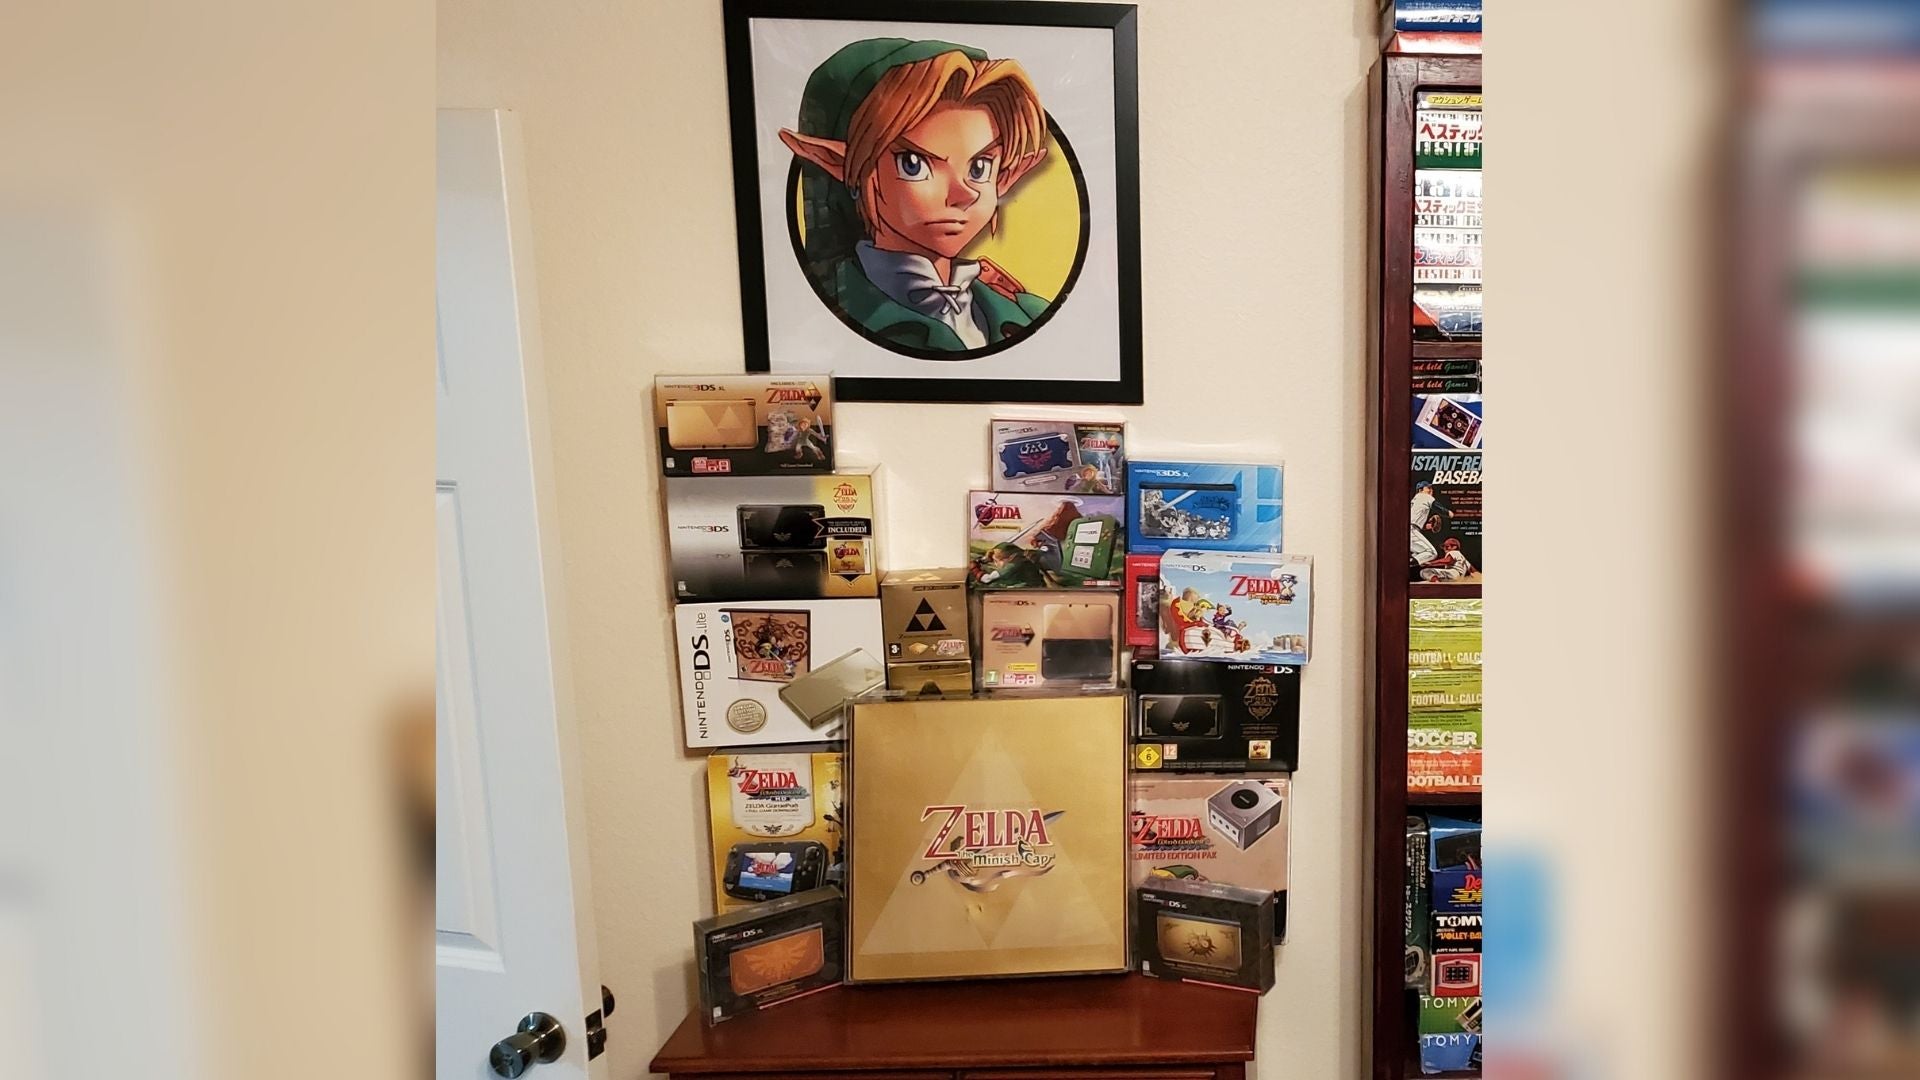 Ever since her older sister brought home The Legend of Zelda in 1987, Linda has dedicated a portion of her massive collection to all things Zelda. (Photo: Linda Guillory)